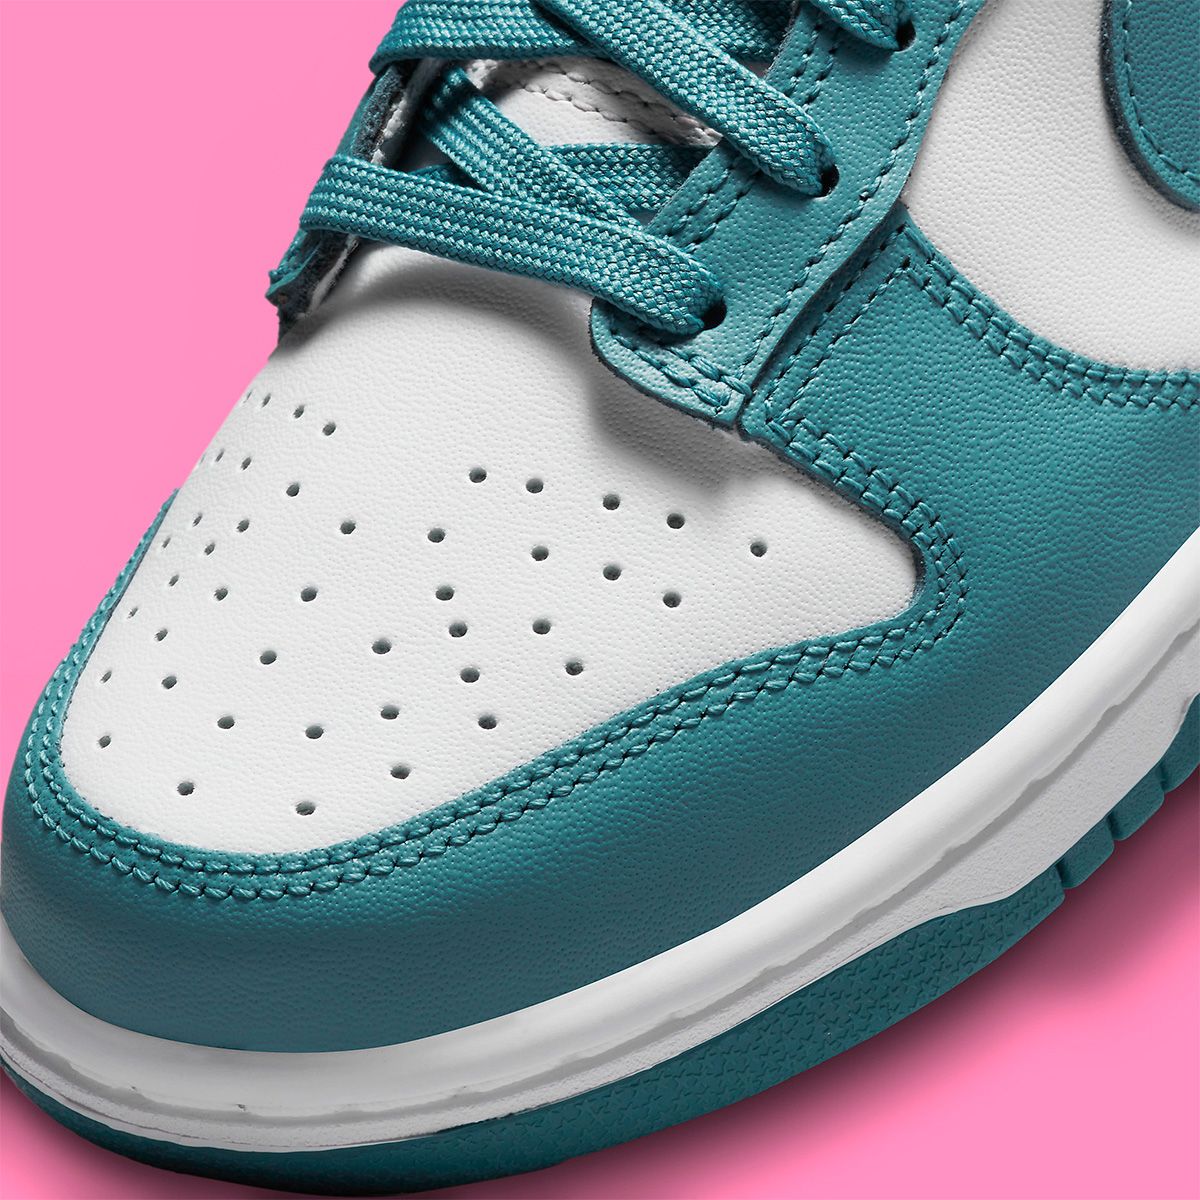 Nike Puts Pops of Pink on This White and Teal Dunk Low | HOUSE OF HEAT